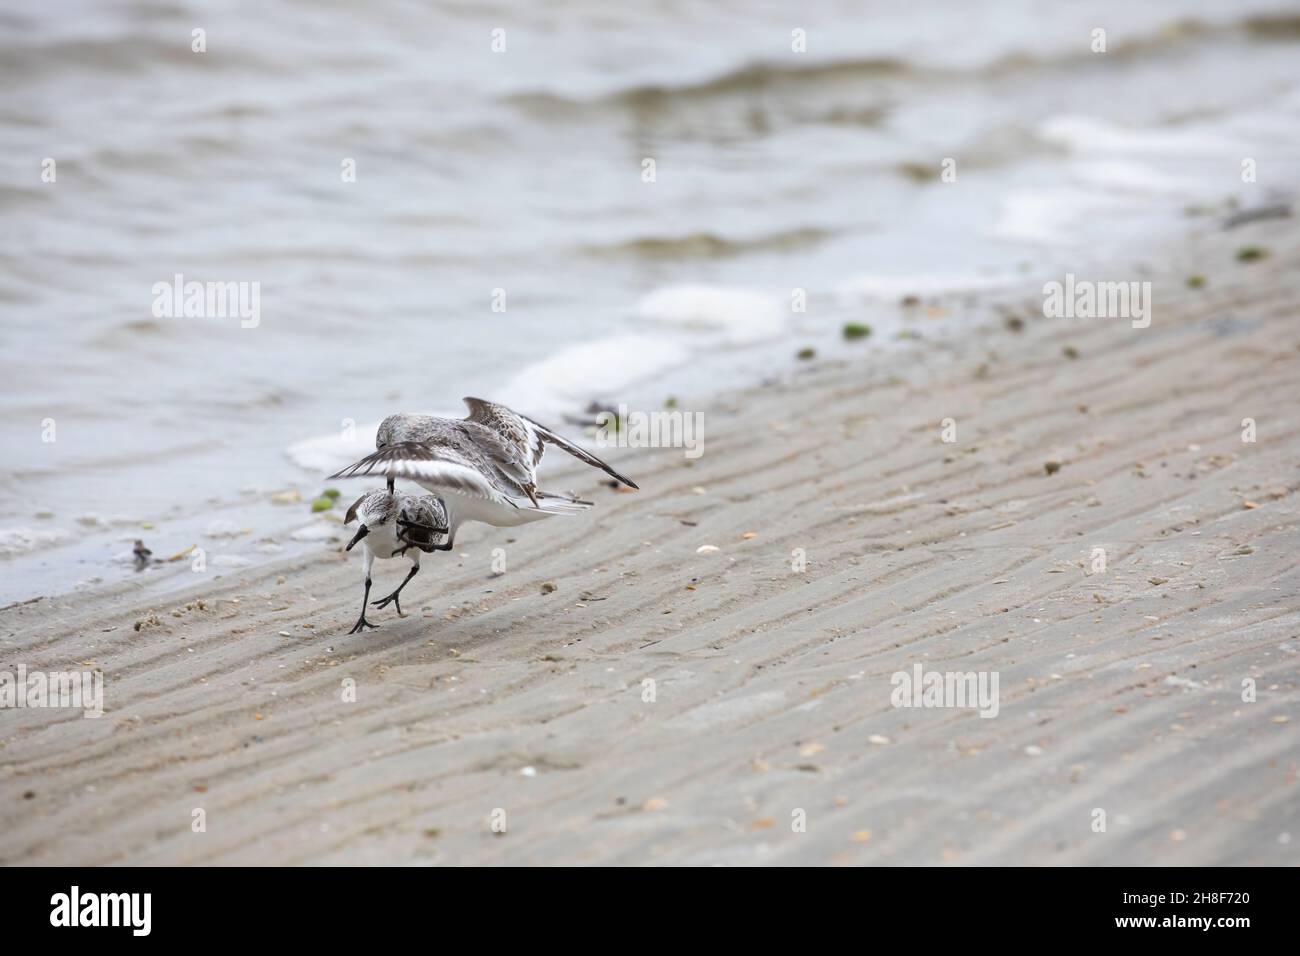 Two sanderlings fighting on the beach at Fort Matanzas Inlet in Fort Matanzas Monument. Stock Photo